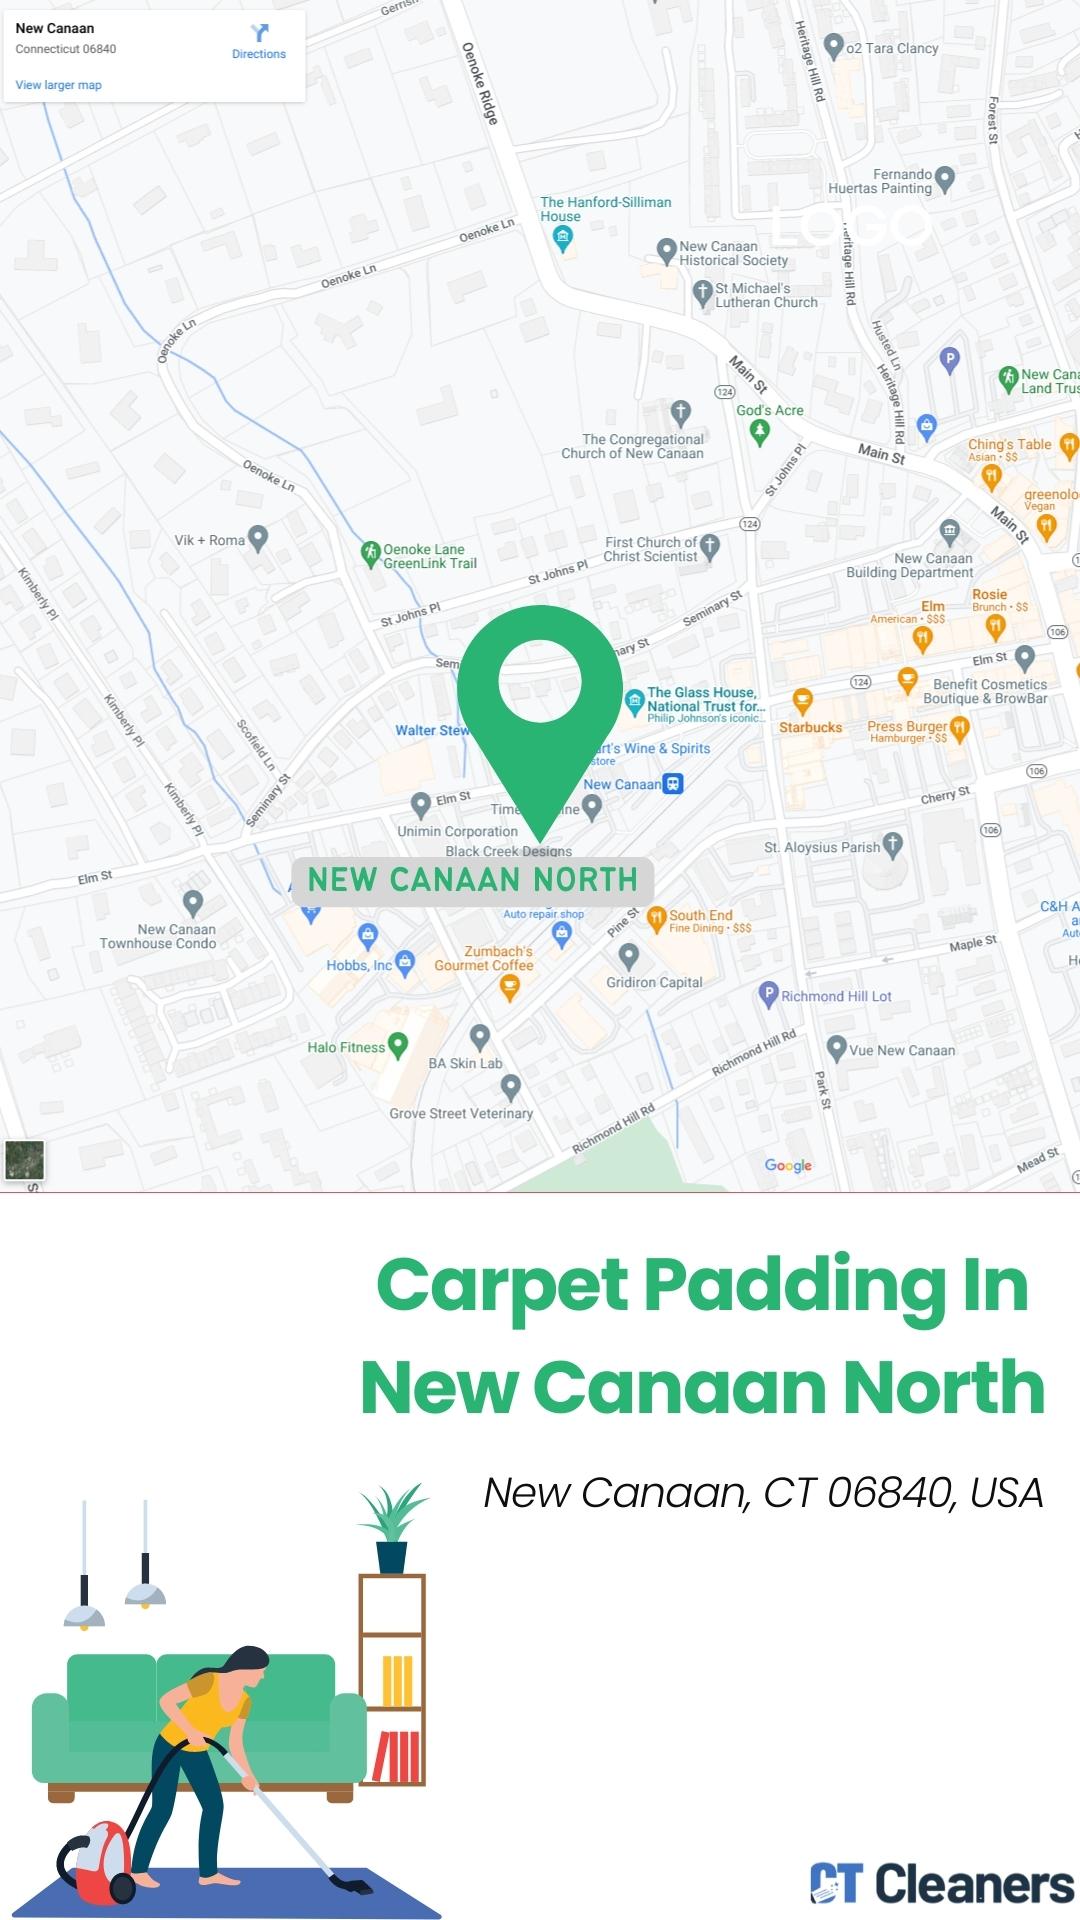 Carpet Padding in New Canaan North Map